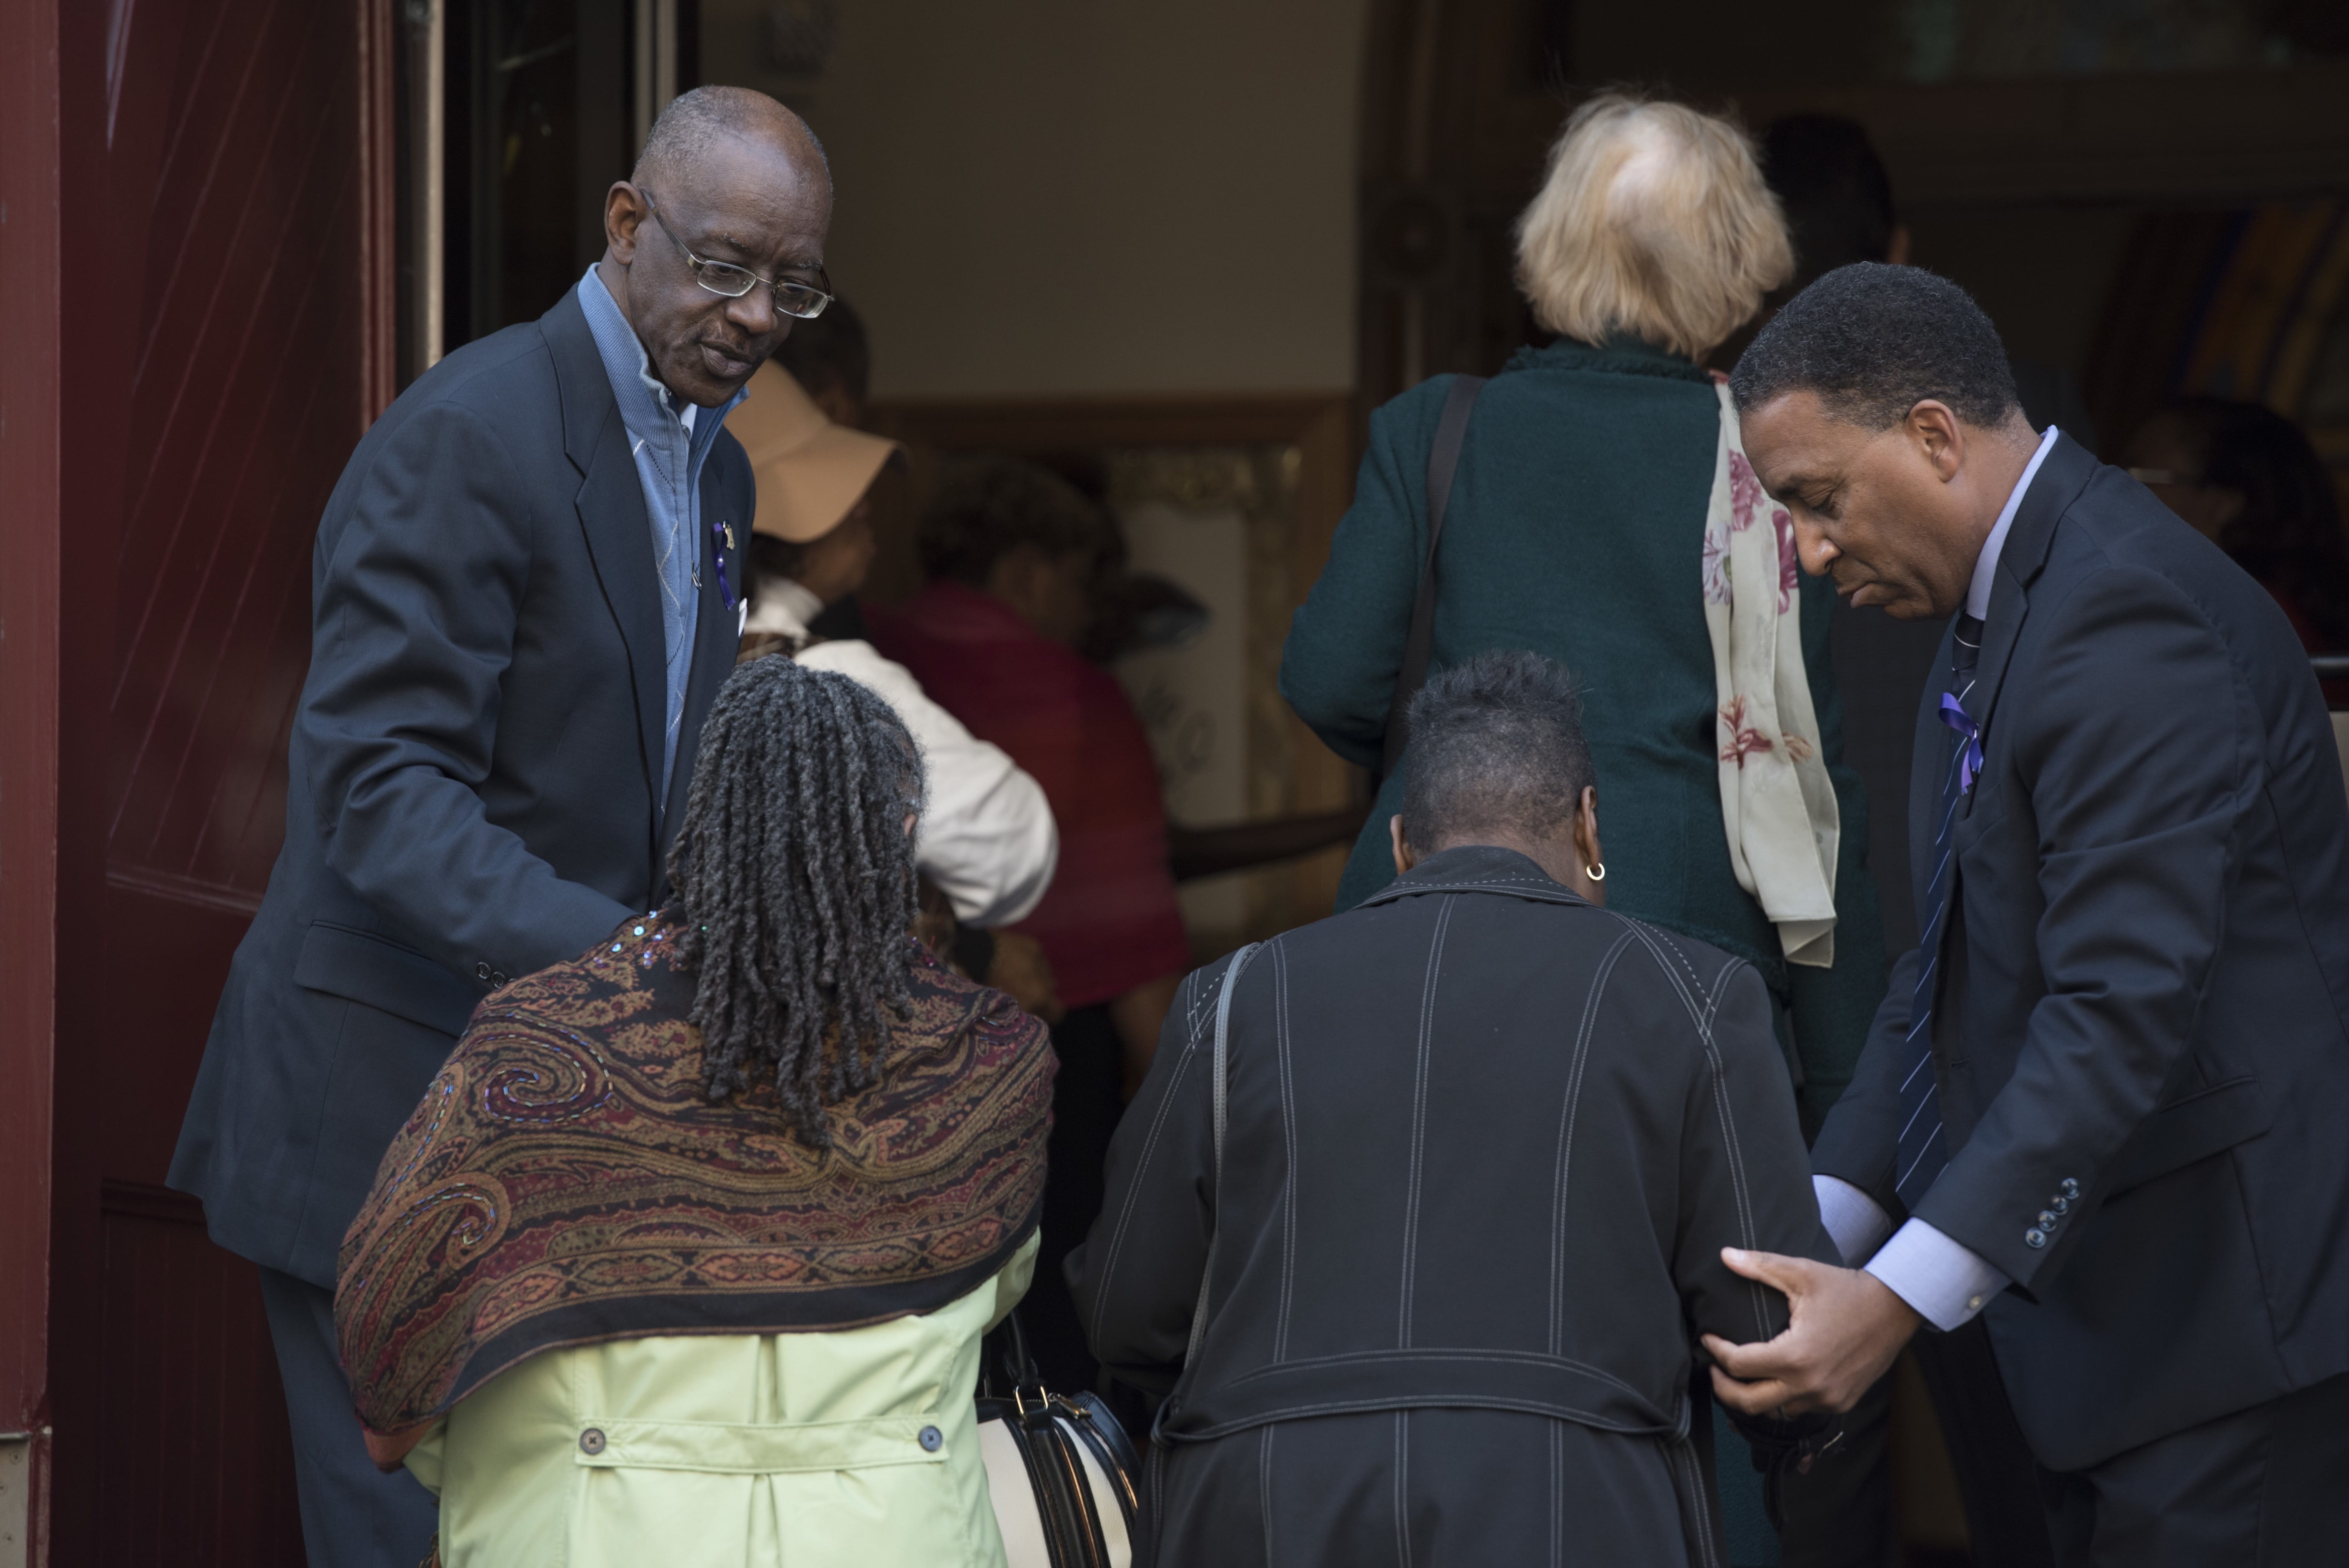 Attendees arrive at Metropolitan A.M.E. Church for the memorial service for journalist Gwen Ifill in Washington, Saturday, Nov. 19, 2016.